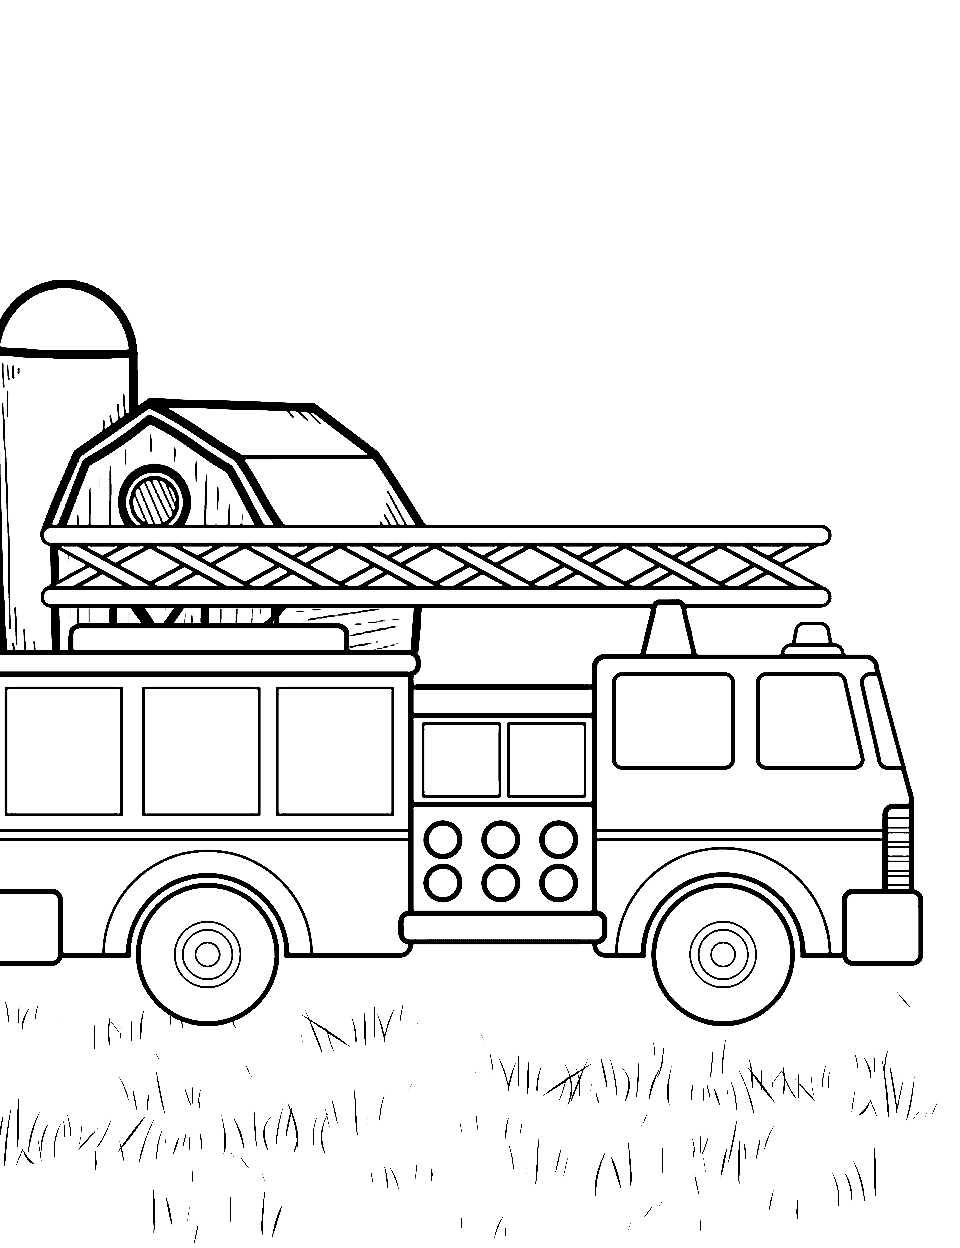 Rural Fire Brigade Truck Coloring Page - A fire truck in a rural setting, with fields and a barn in the background.